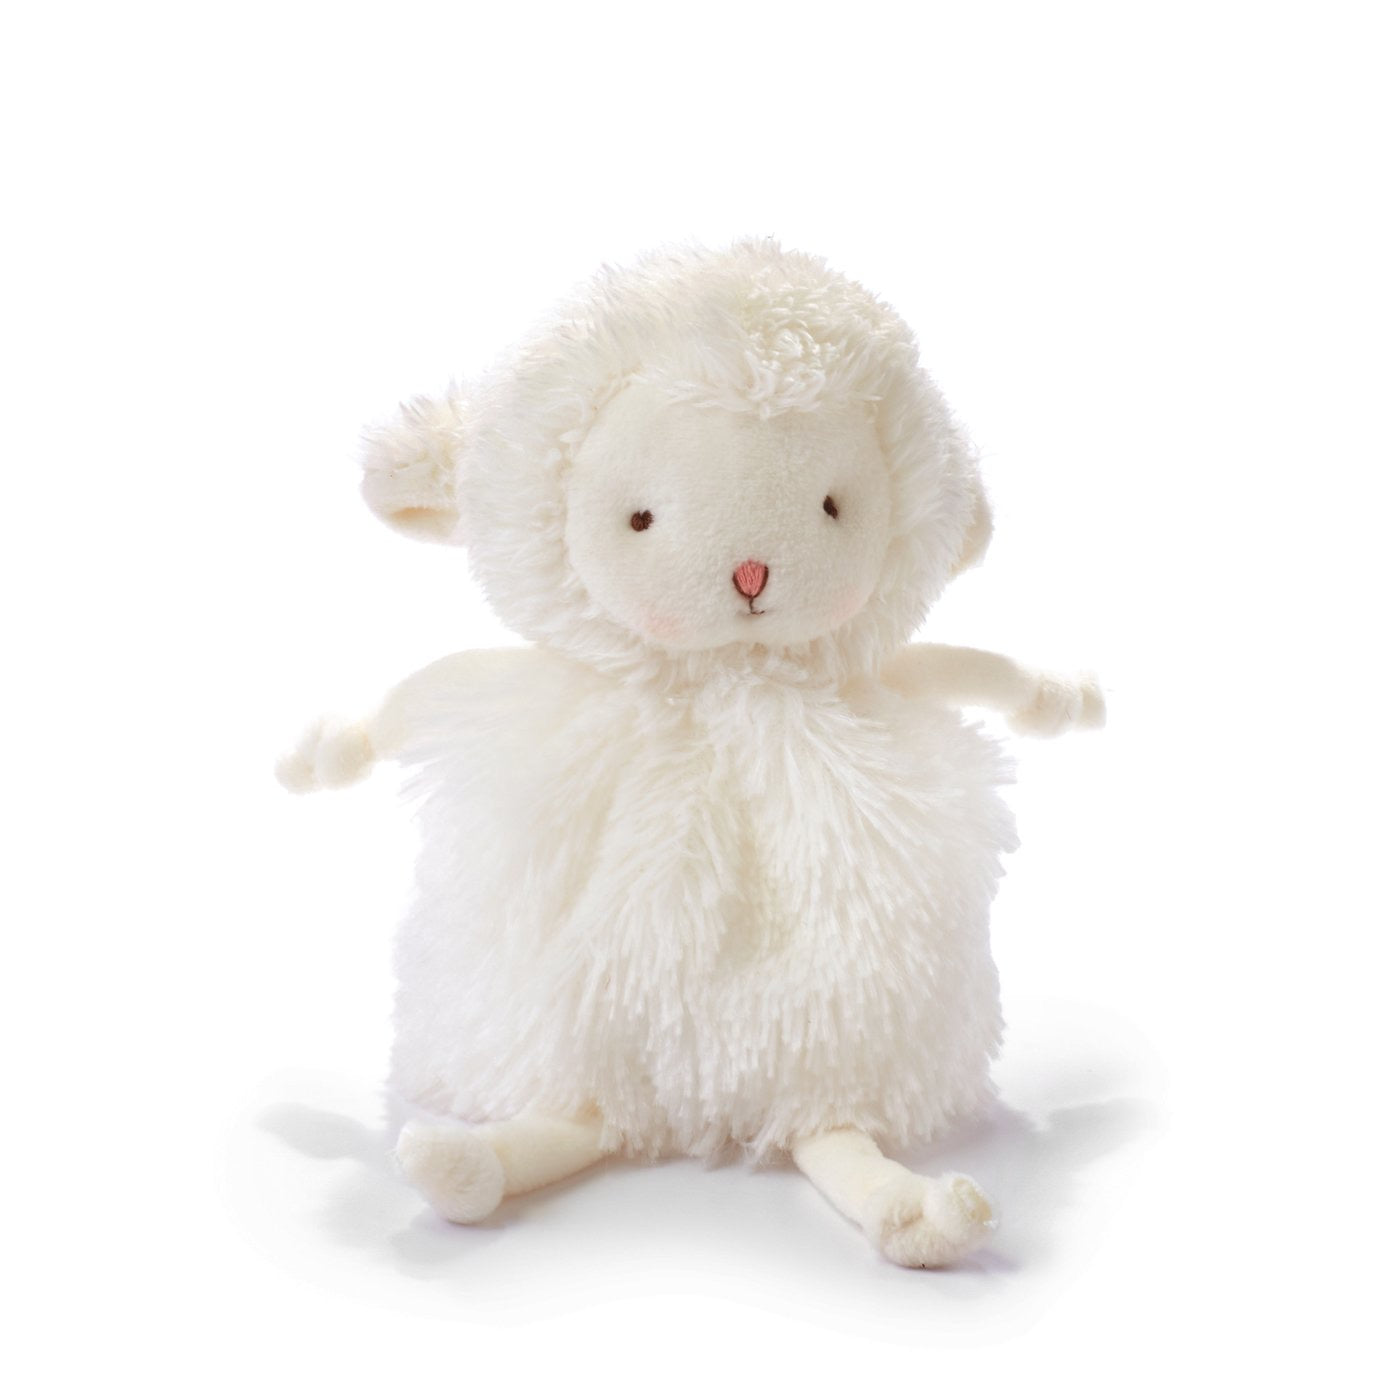 KIDDO ROLY POLY WHITE LAMB - LIMITED EDITION